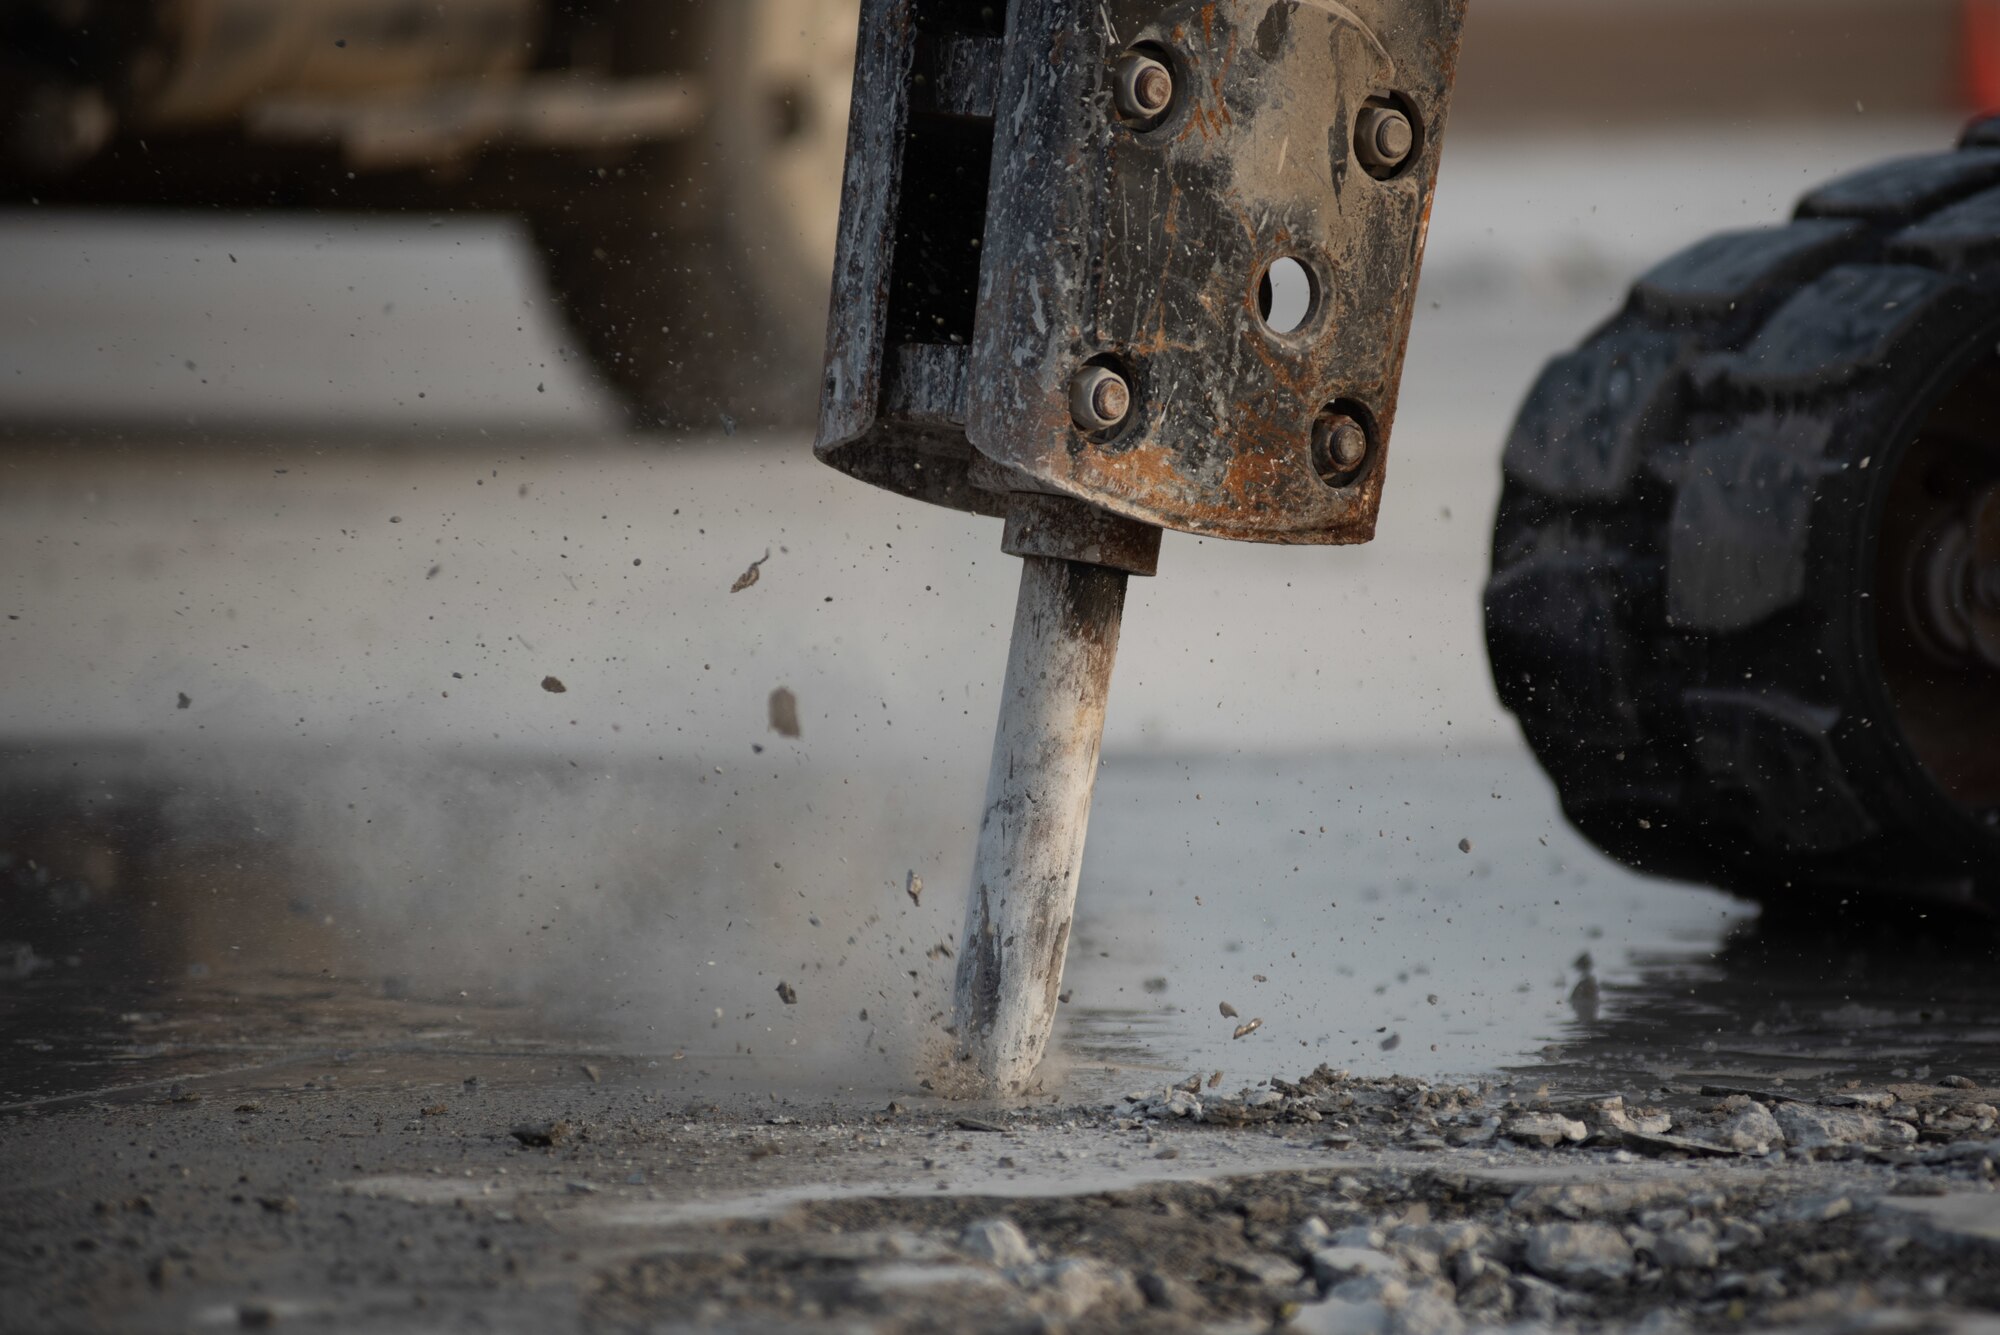 A compact track loader with a jackhammer attachment breaks concrete during a rapid airfield damage repair exercise July 26, 2019, at Al Dhafra Air Base, United Arab Emirates. After breaking the concrete apart, an excavator can remove the debris allowing the hole to be filled with fast-curing concrete. (U.S. Air Force photo by Staff Sgt. Chris Thornbury)